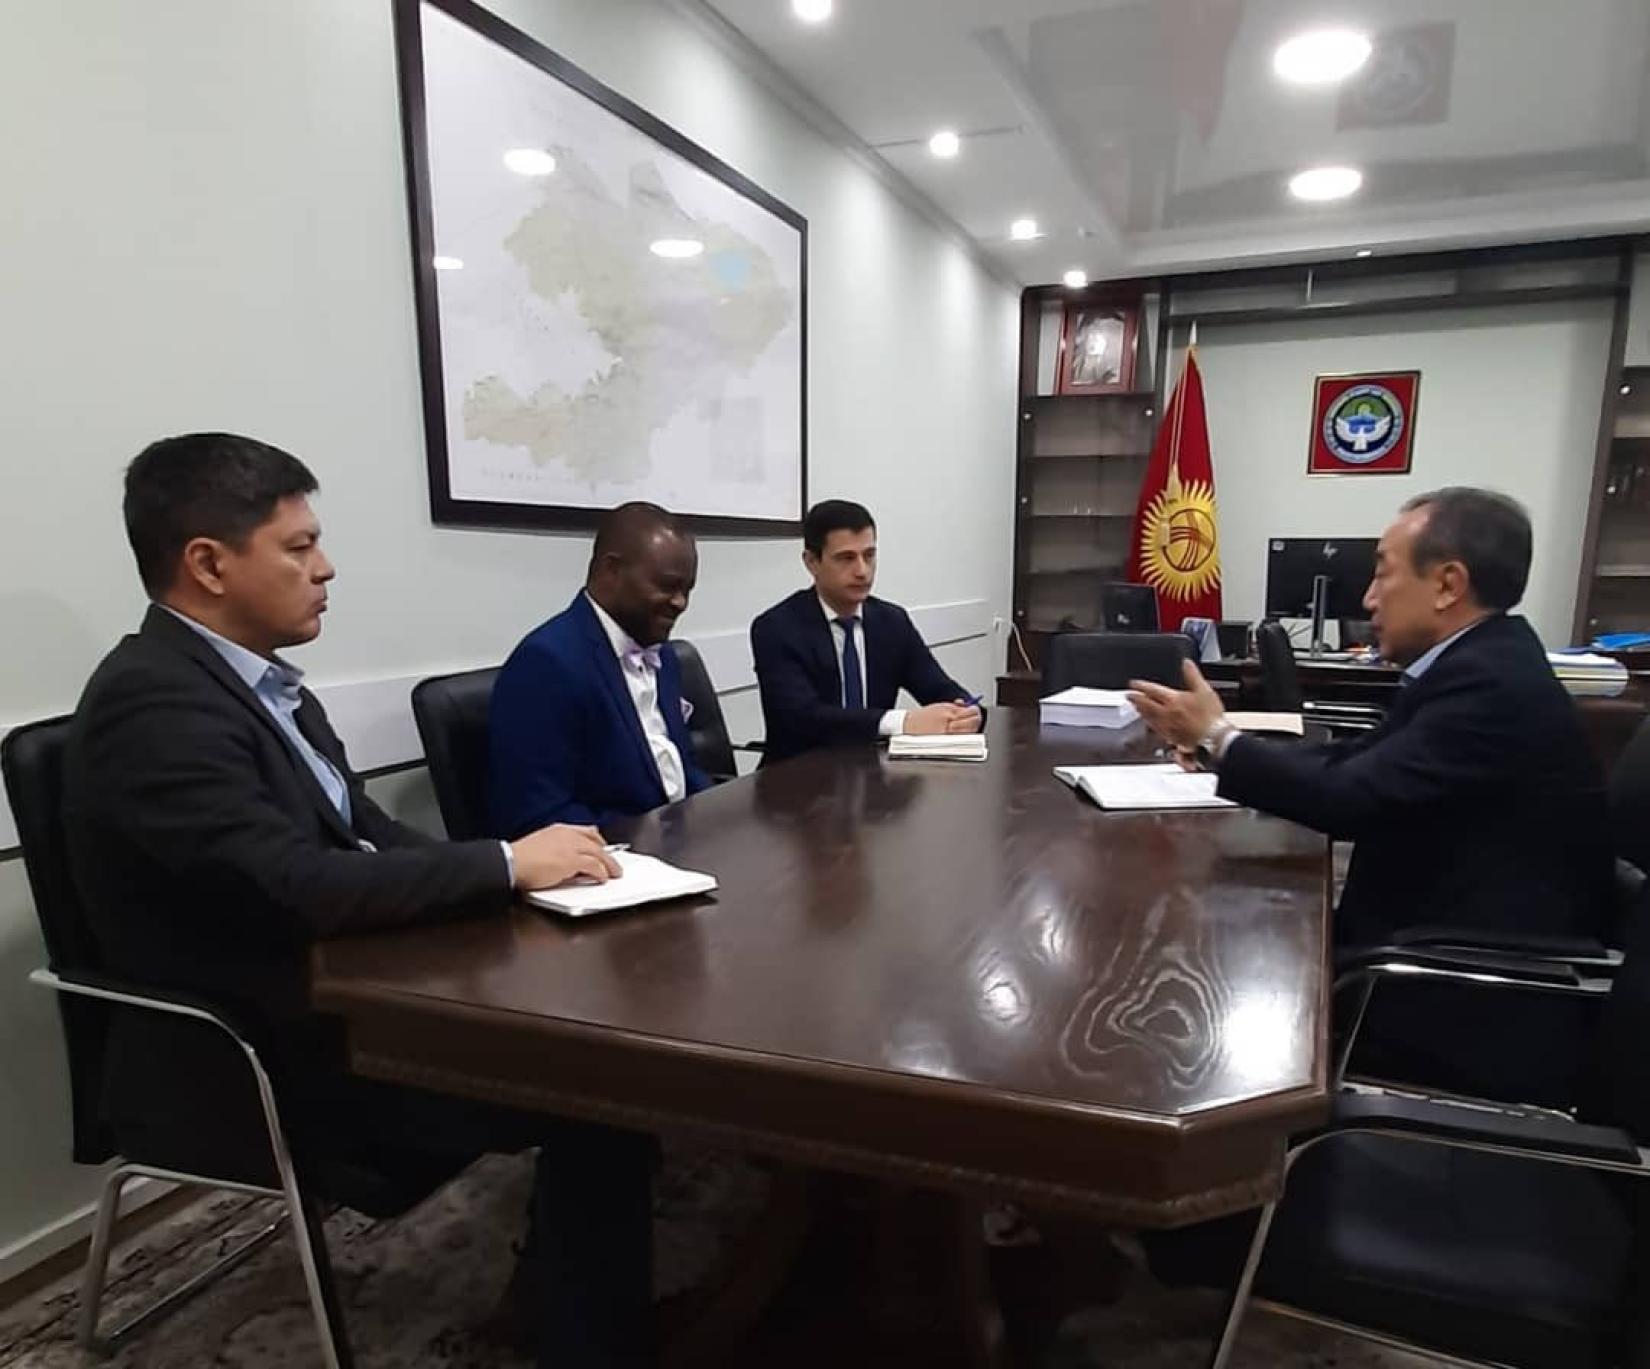 Meeting of UNRC Ozonnia Ojielo with Minister of Labour, Social Welfare and Migration Kudaibergen Bazarbaev 